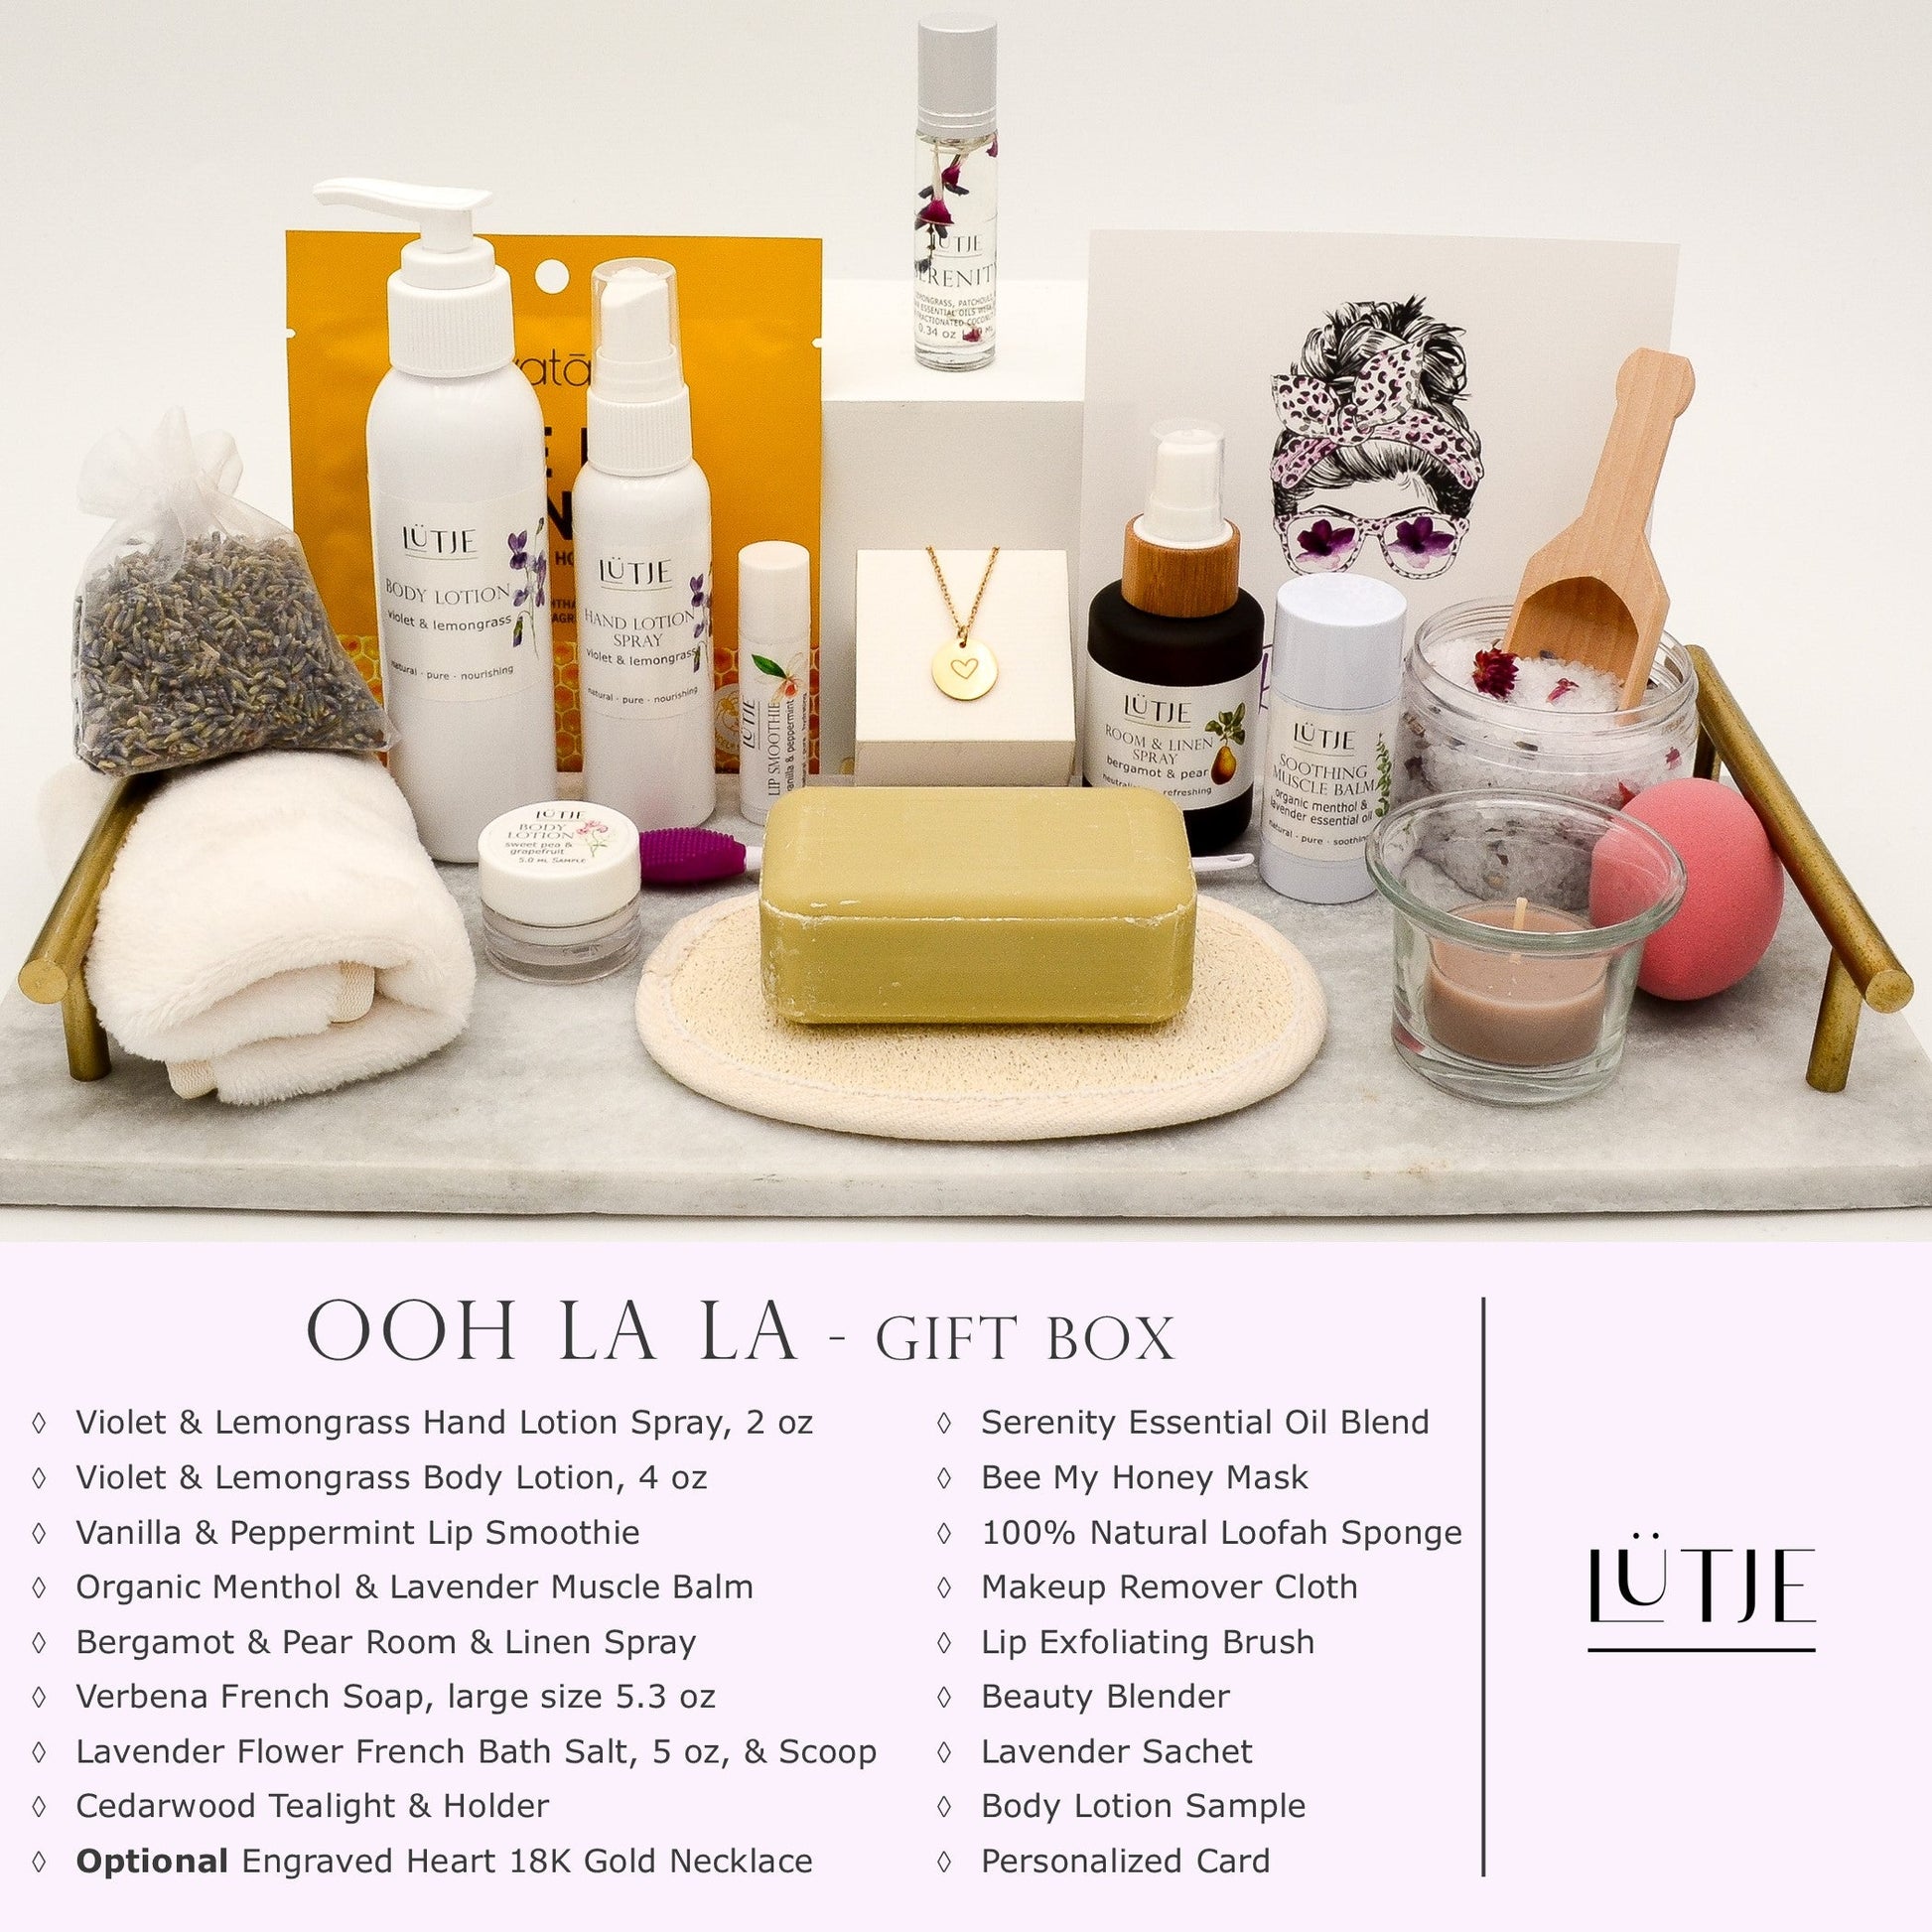 Ooh La La Gift Box for women, wife, daughter, BFF, sister, mom, or grandma, includes Violet & Lemongrass hand lotion spray and body lotion, essential oil, lip balm, soothing muscle balm, Bergamot & Pear room & linen spray, French soap, French bath salts, hydrating face mask, other bath, spa and self-care items, and optional 18K gold-plated necklace with engraved heart.